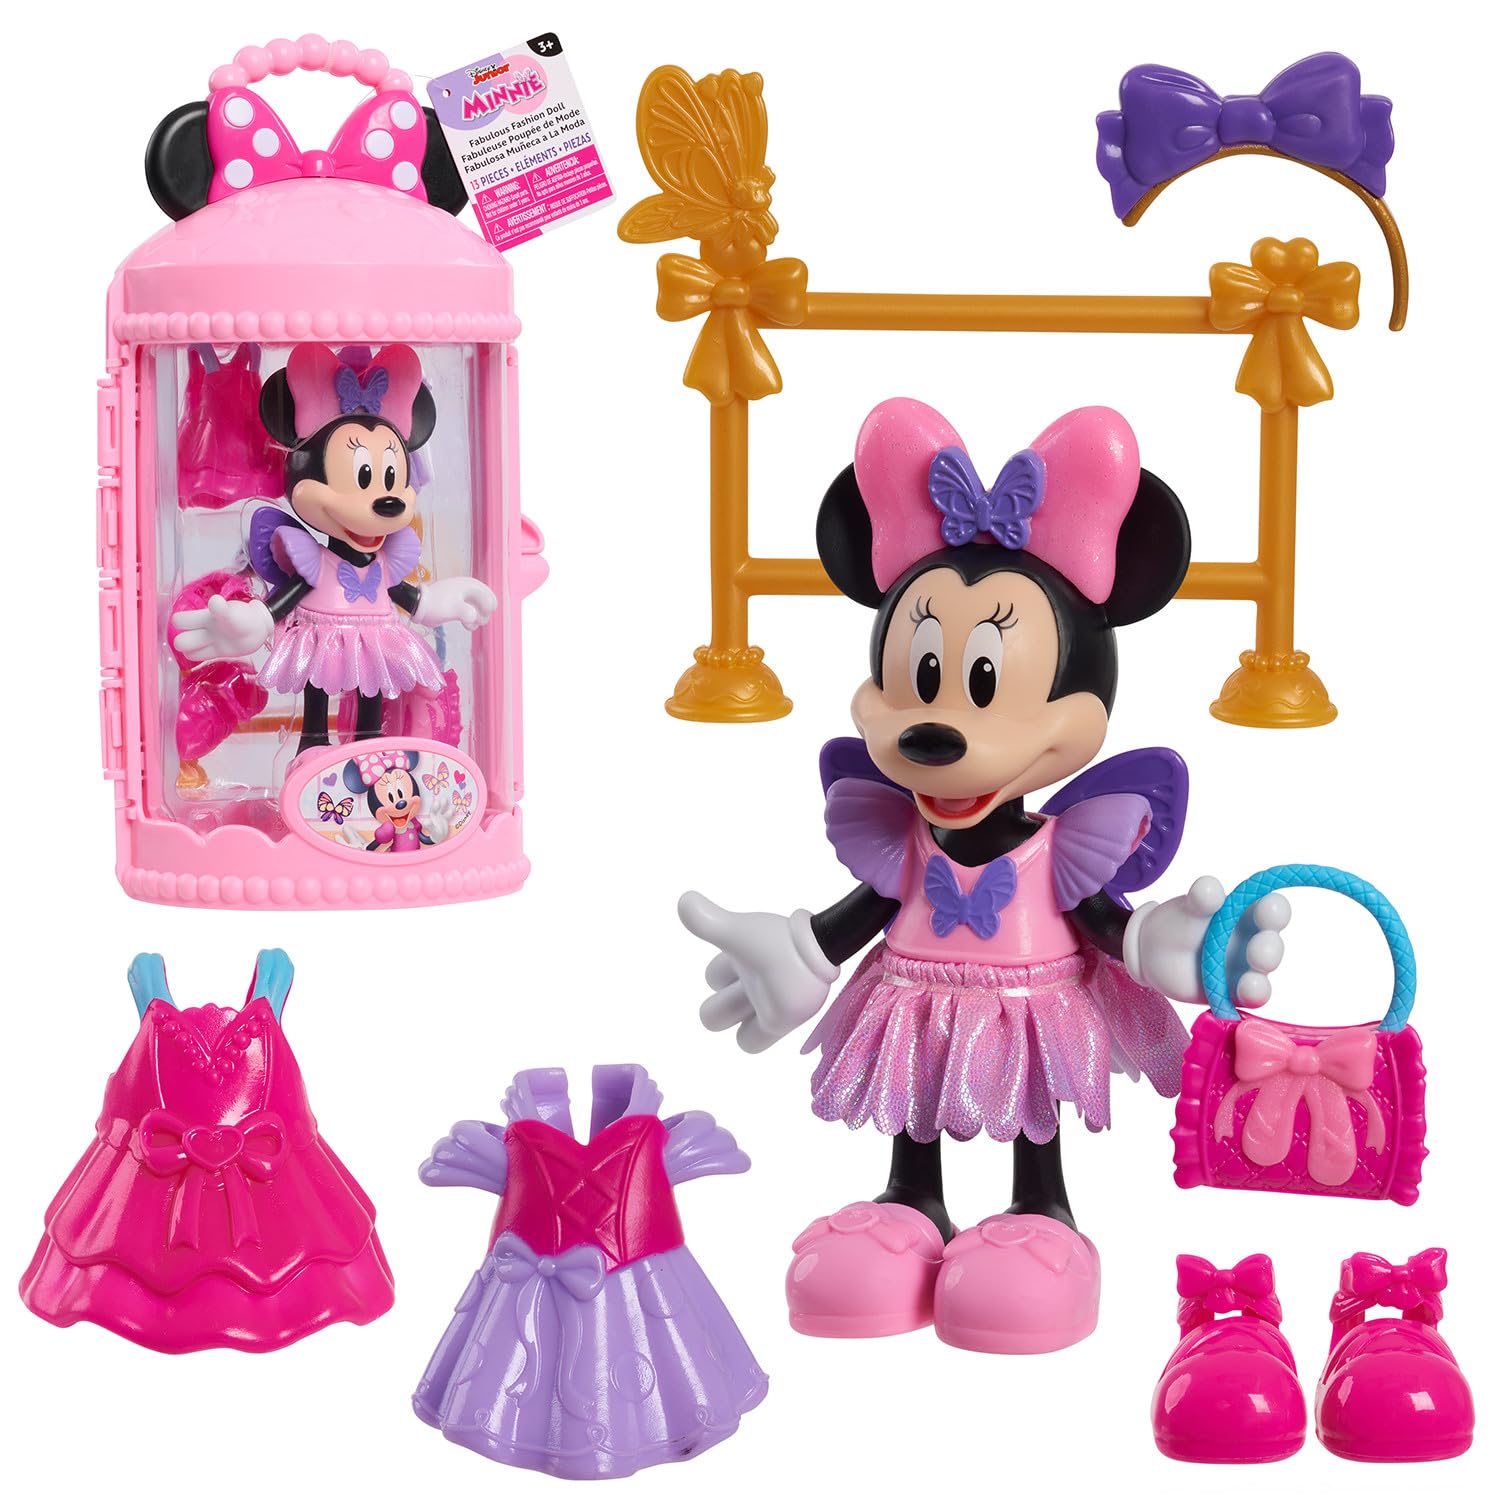 Disney Junior Minnie Mouse Fabulous Fashion Ballerina Doll, 13-piece Doll and Accessories Set, Officially Licensed Kids Toys for Ages 3 Up, Gifts and Presents by Just Play